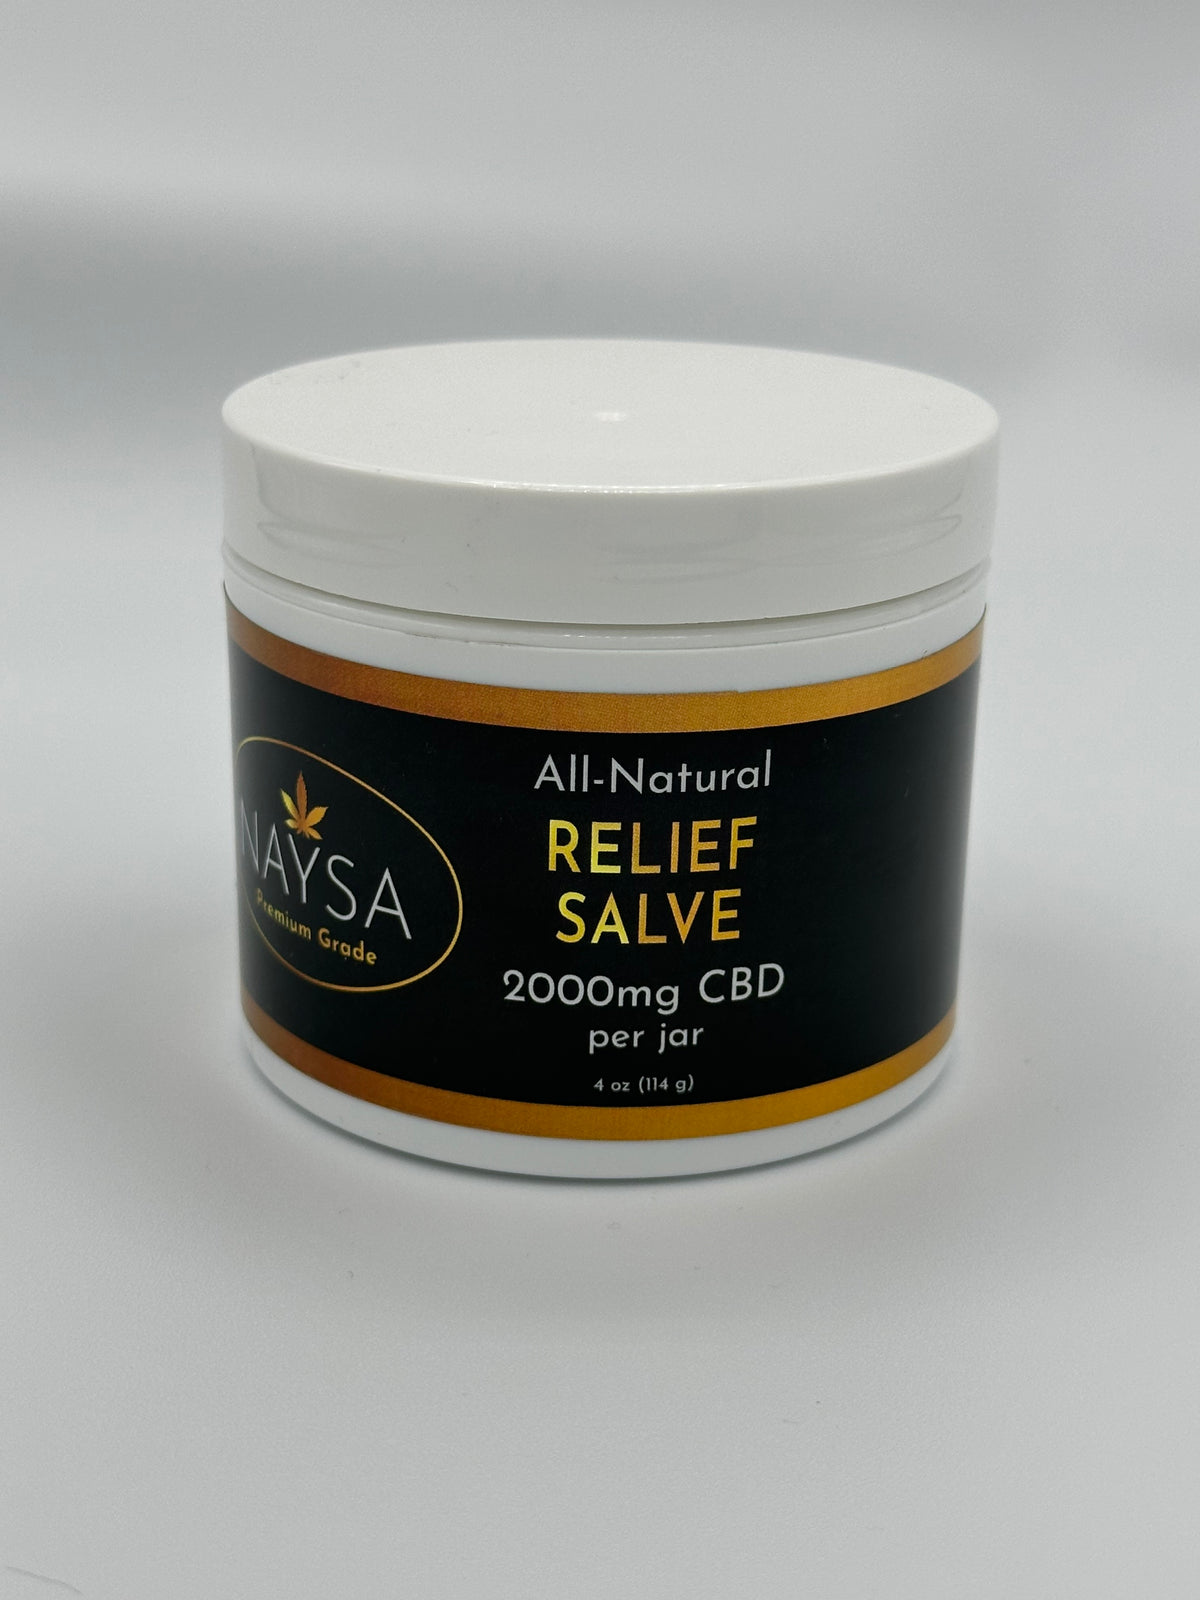 Relief Salve with 2000mg CBD